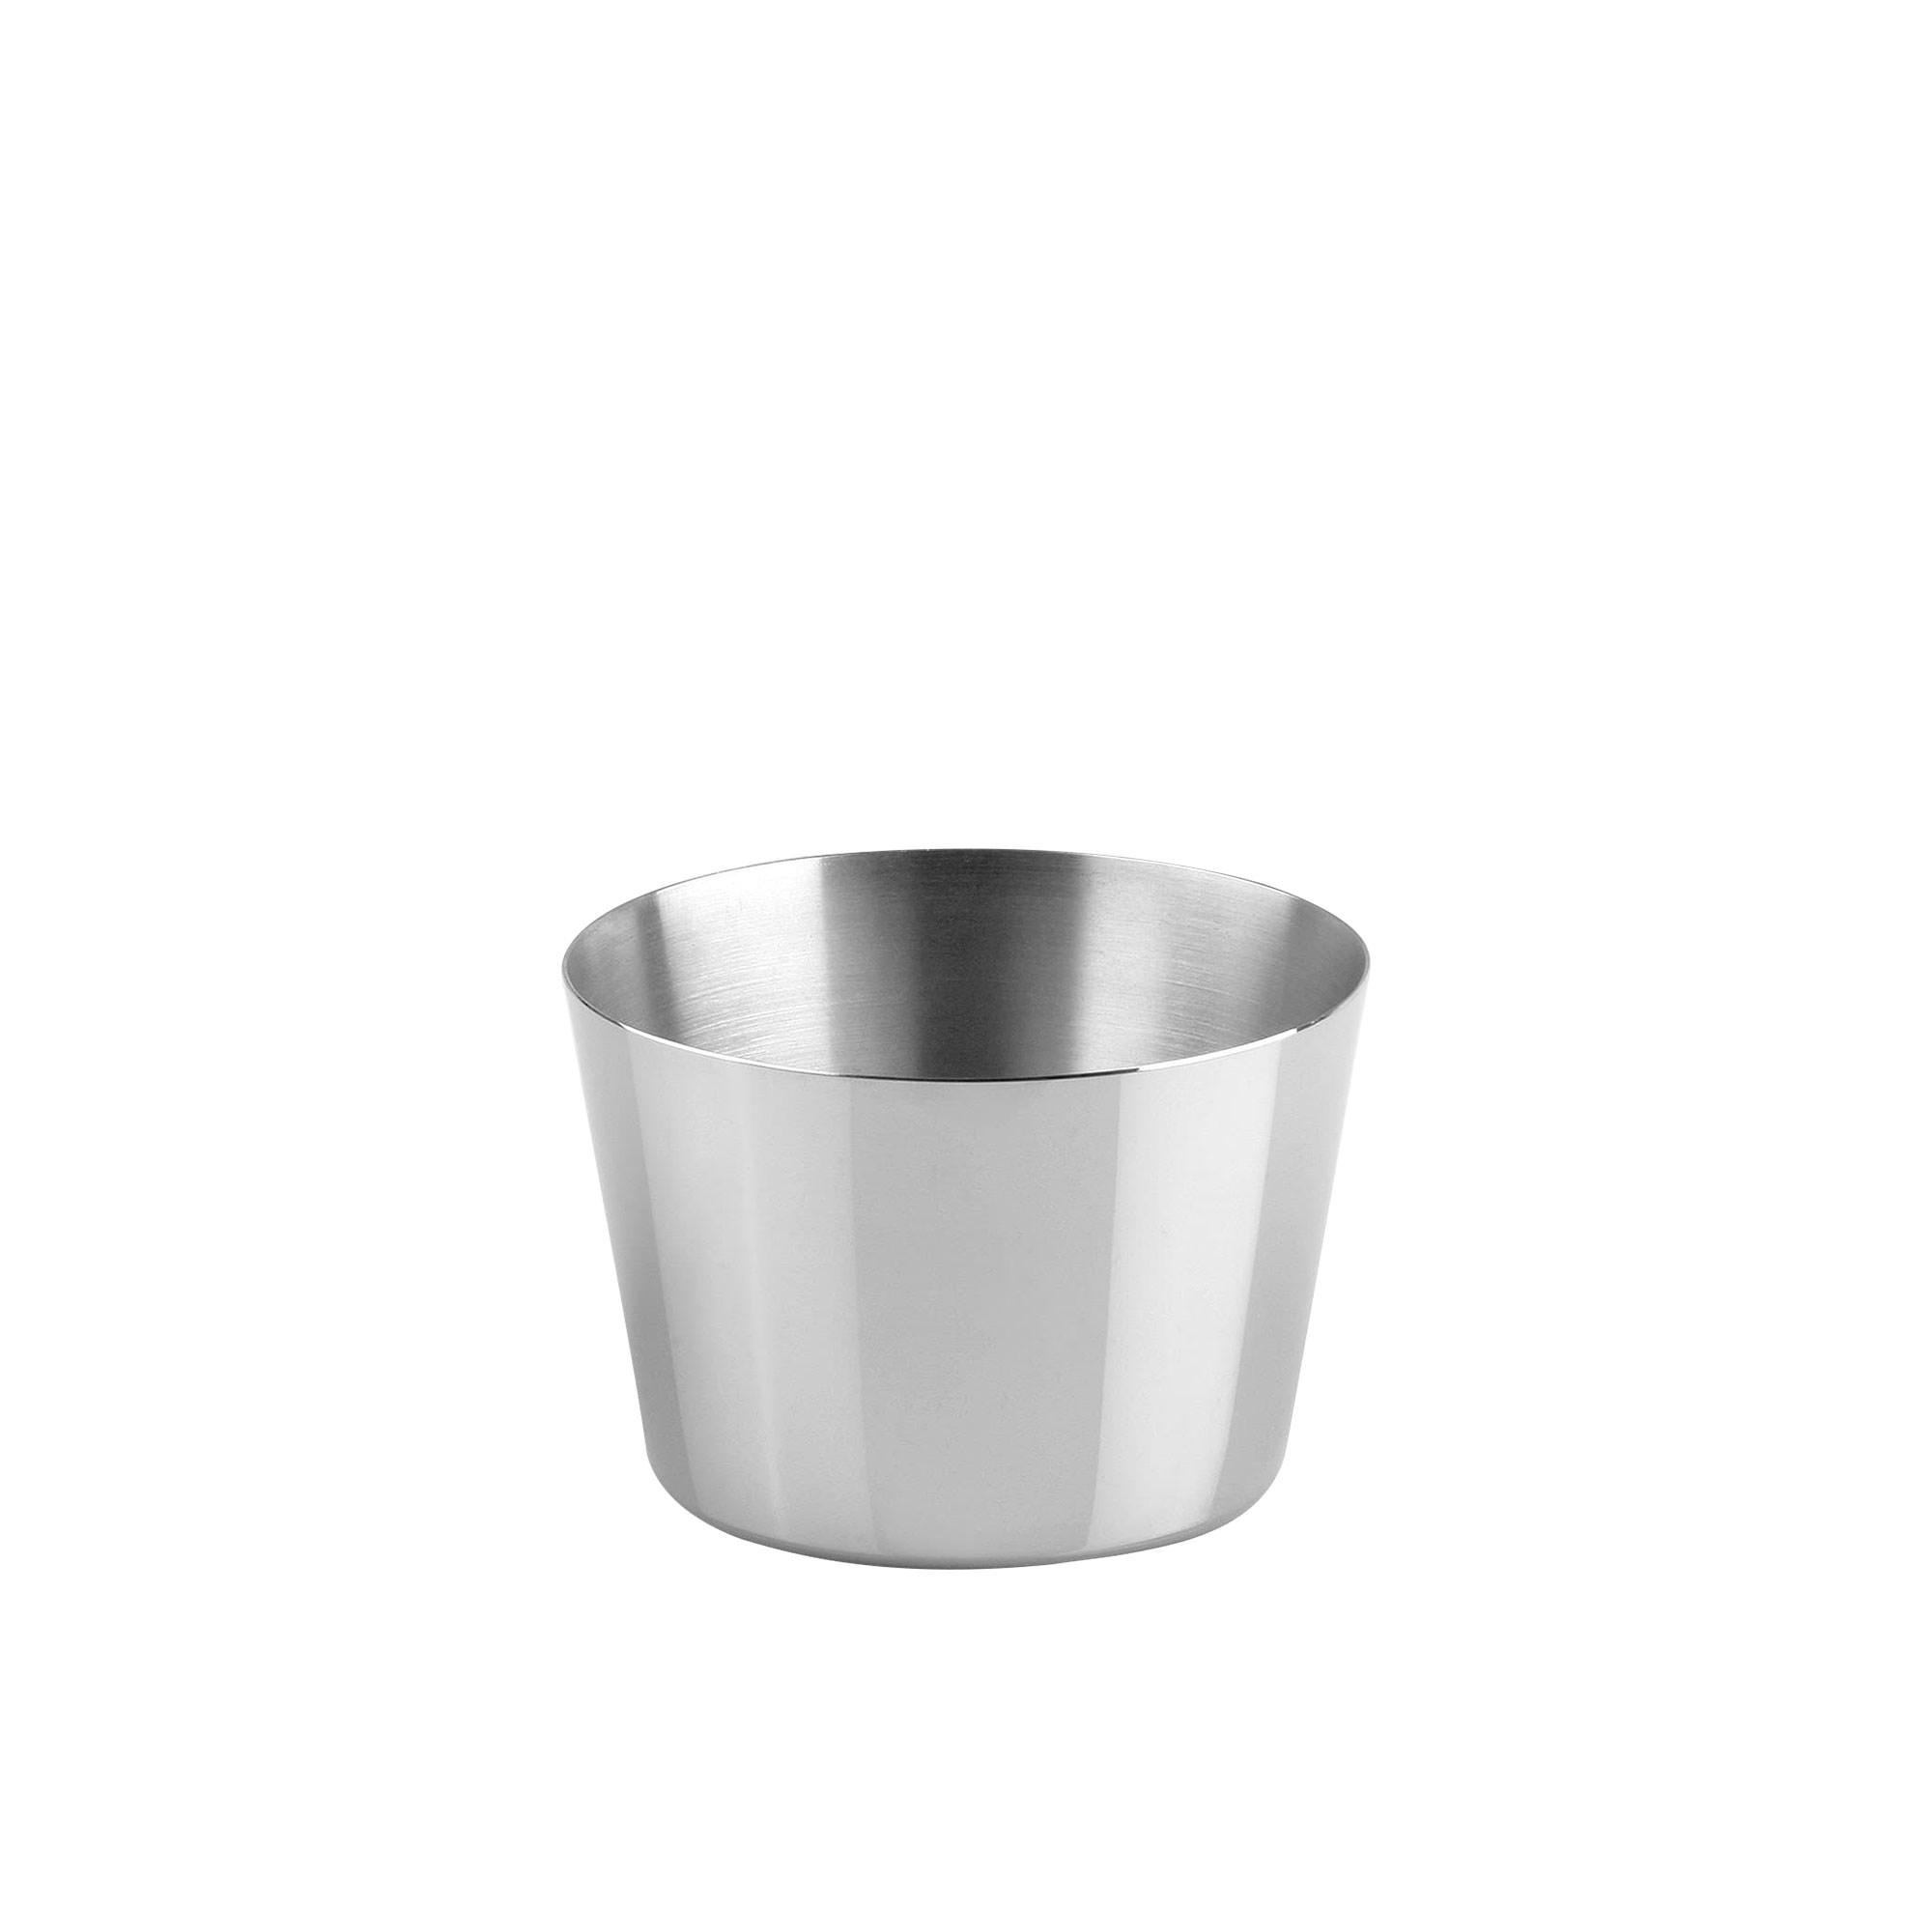 Chef Inox Stainless Steel Pudding Mould 7.5cm Image 1